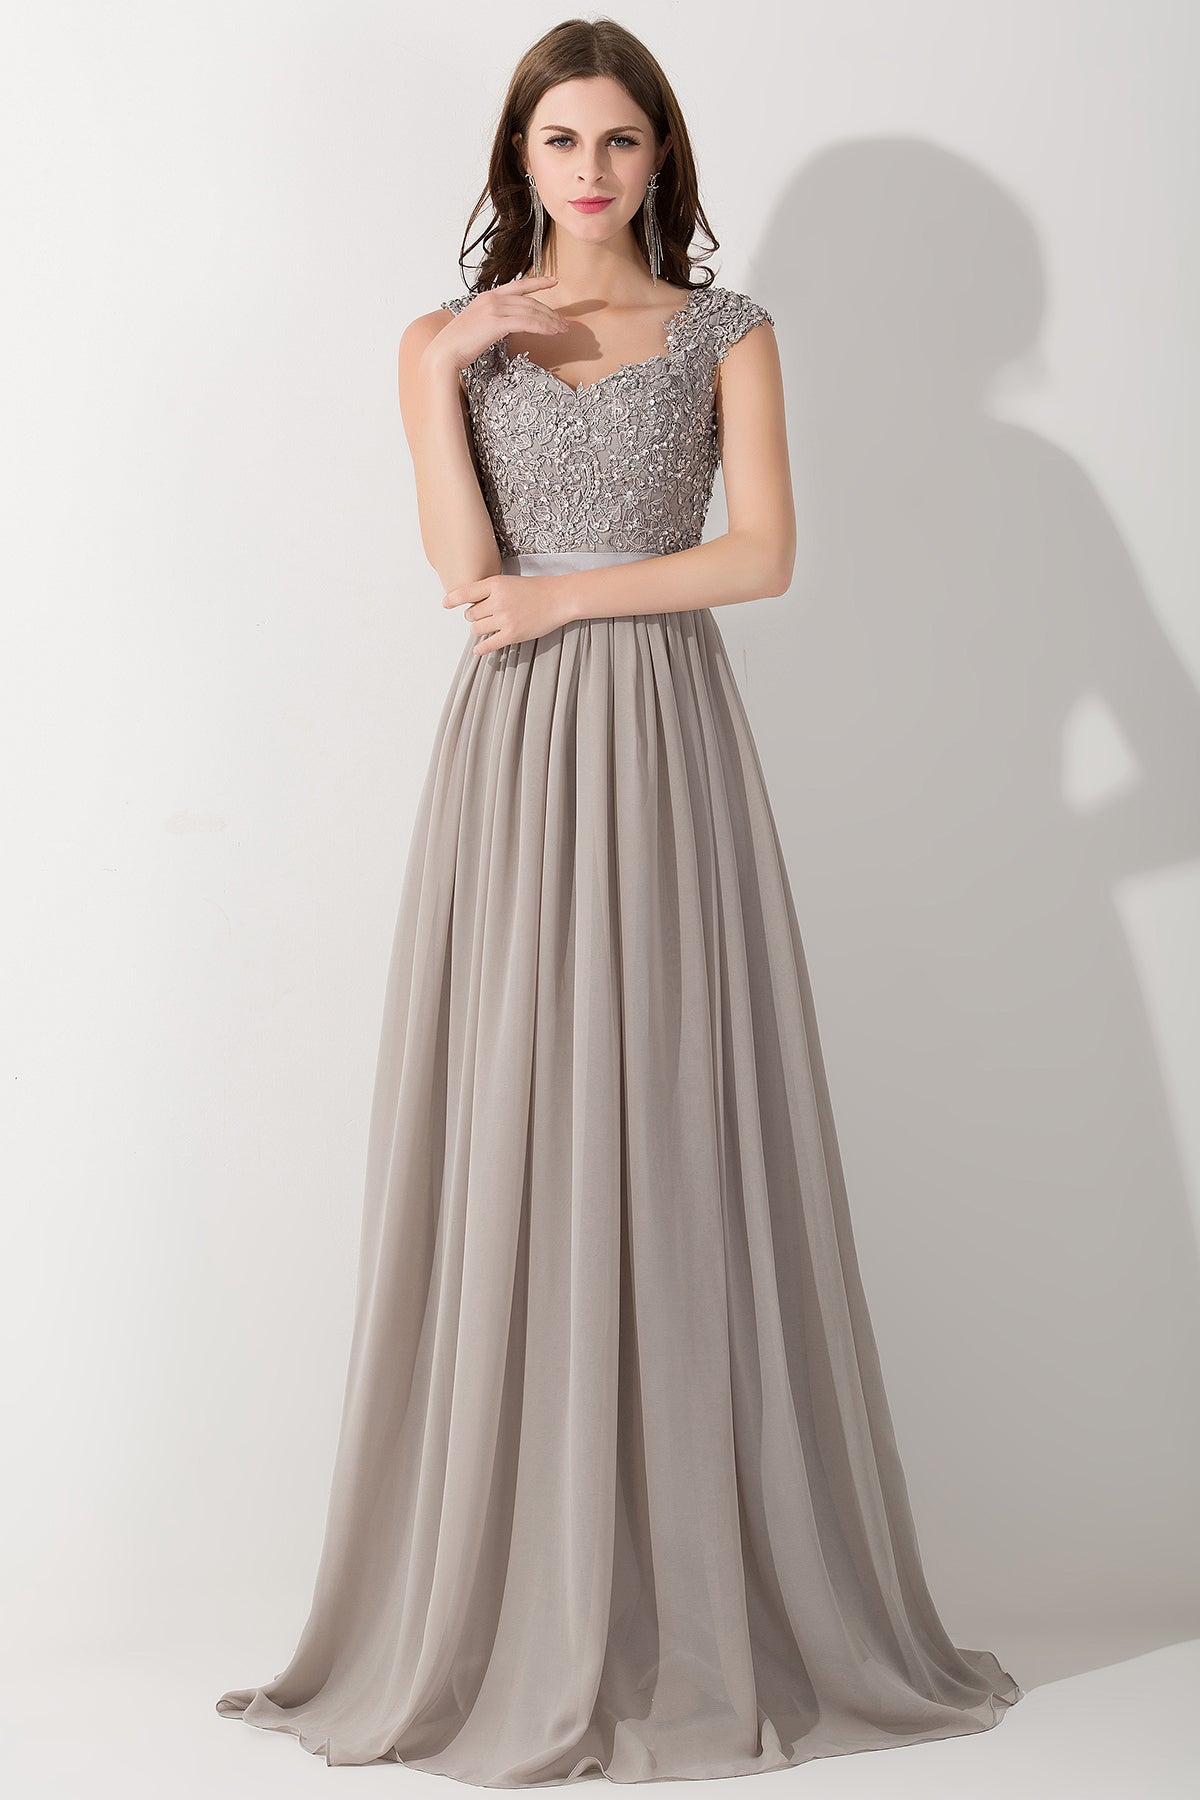 Vintage Silver Sleeveless Long Bridesmaid Dress With Appliques